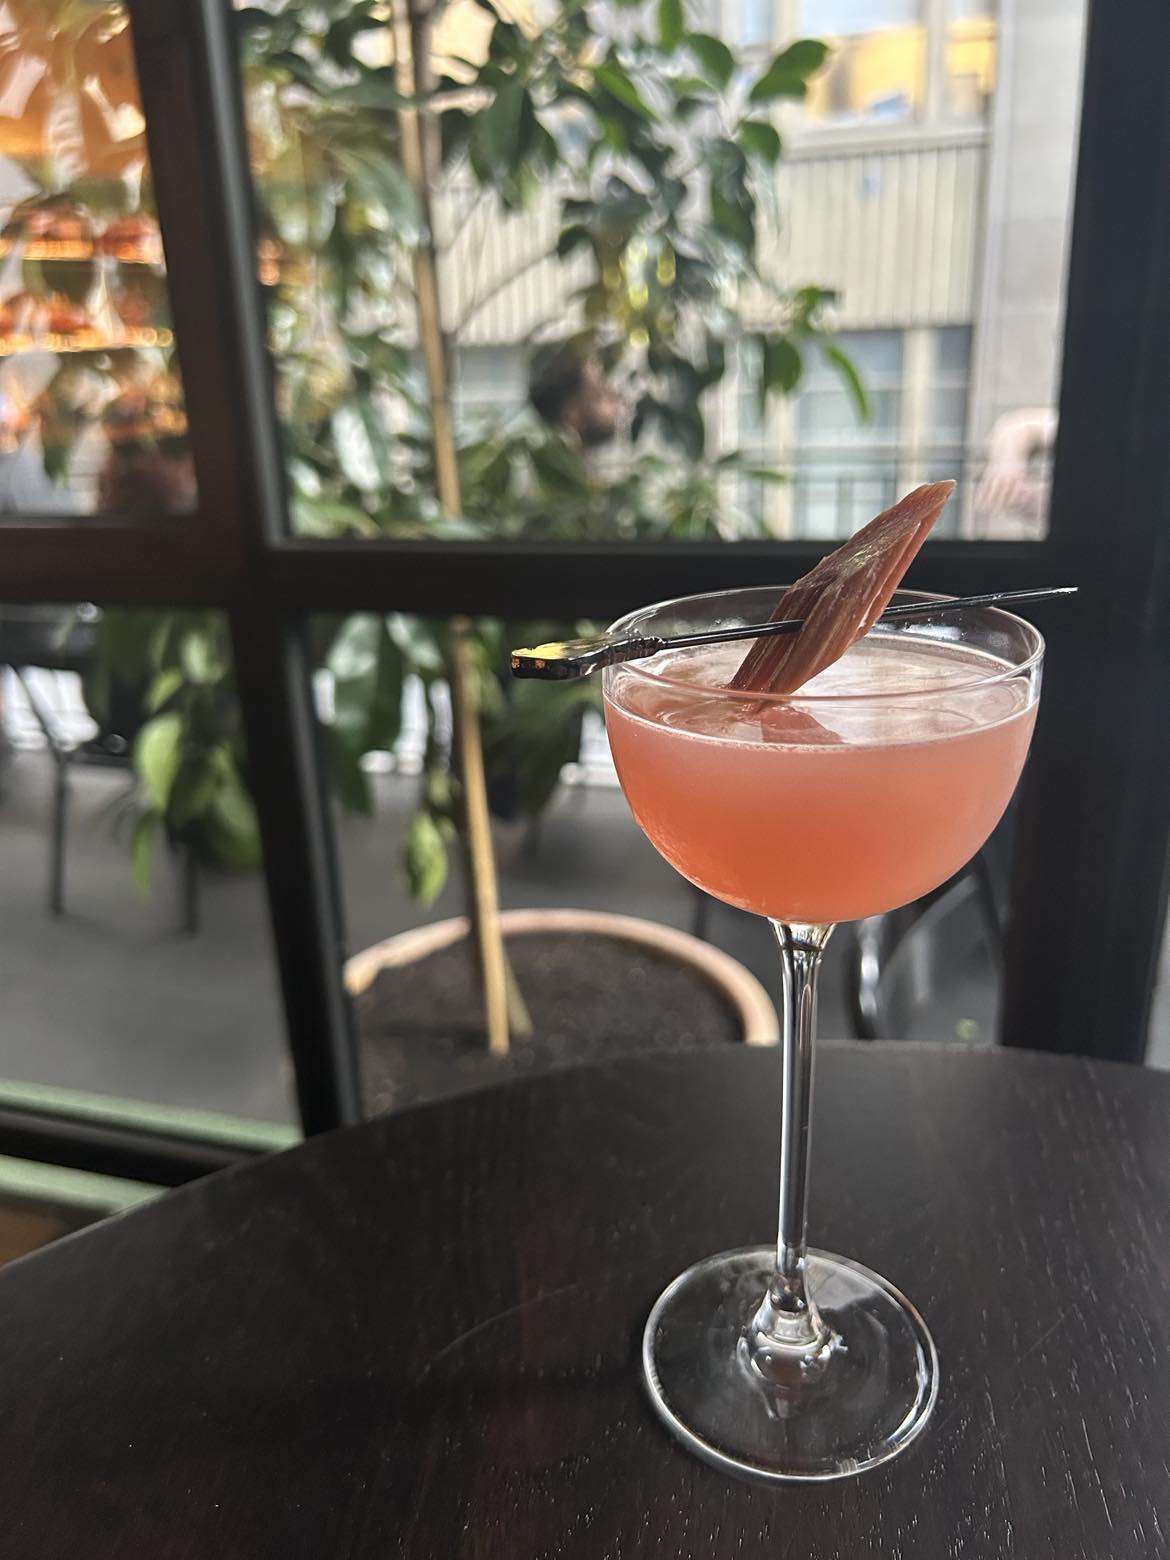 This Raspberry cocktail at Black Kite Commune has no raspberries in it